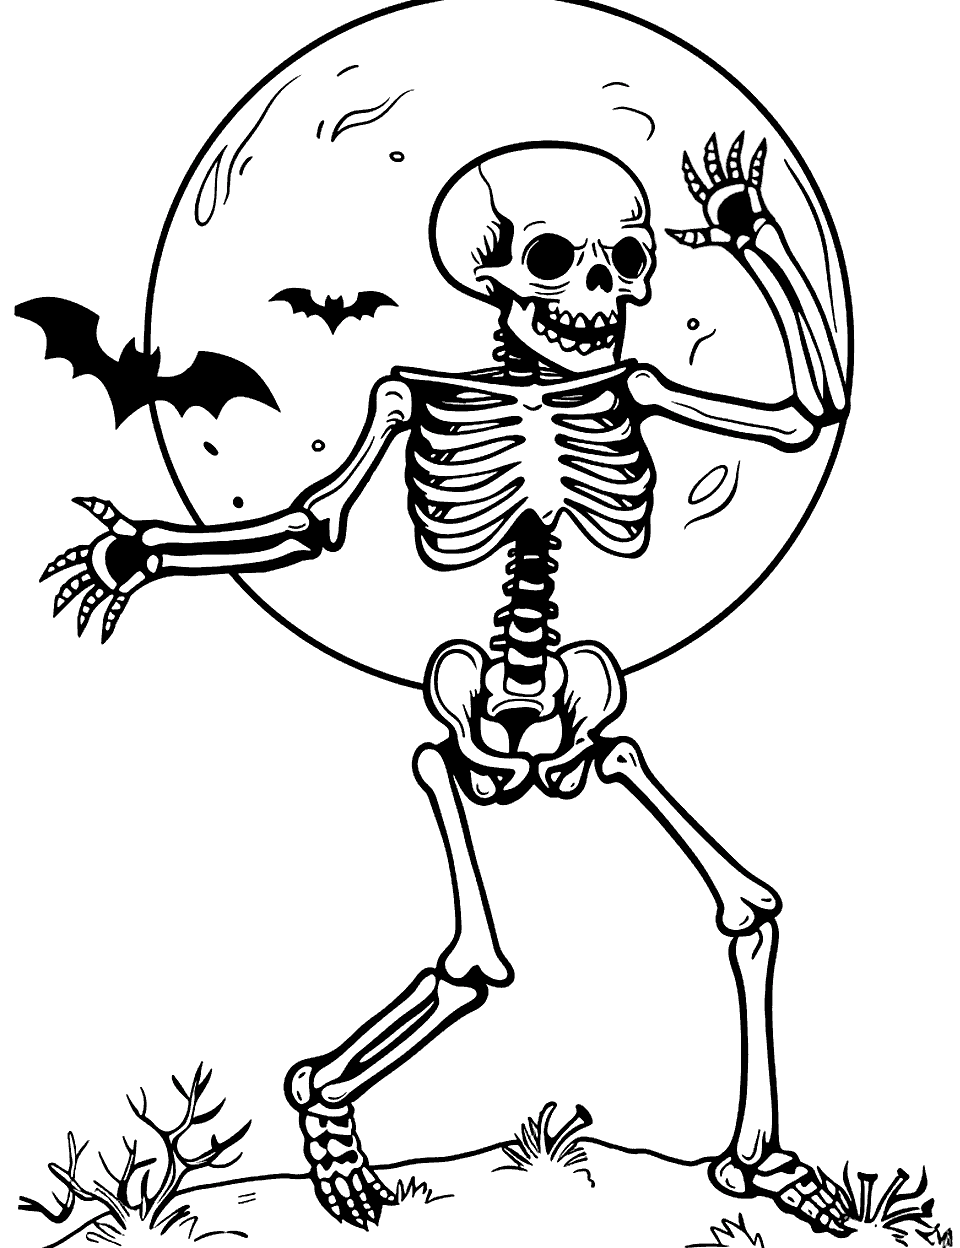 Halloween Night Dance Skeleton Coloring Page - A skeleton dancing under a full moon with bats flying in the background.